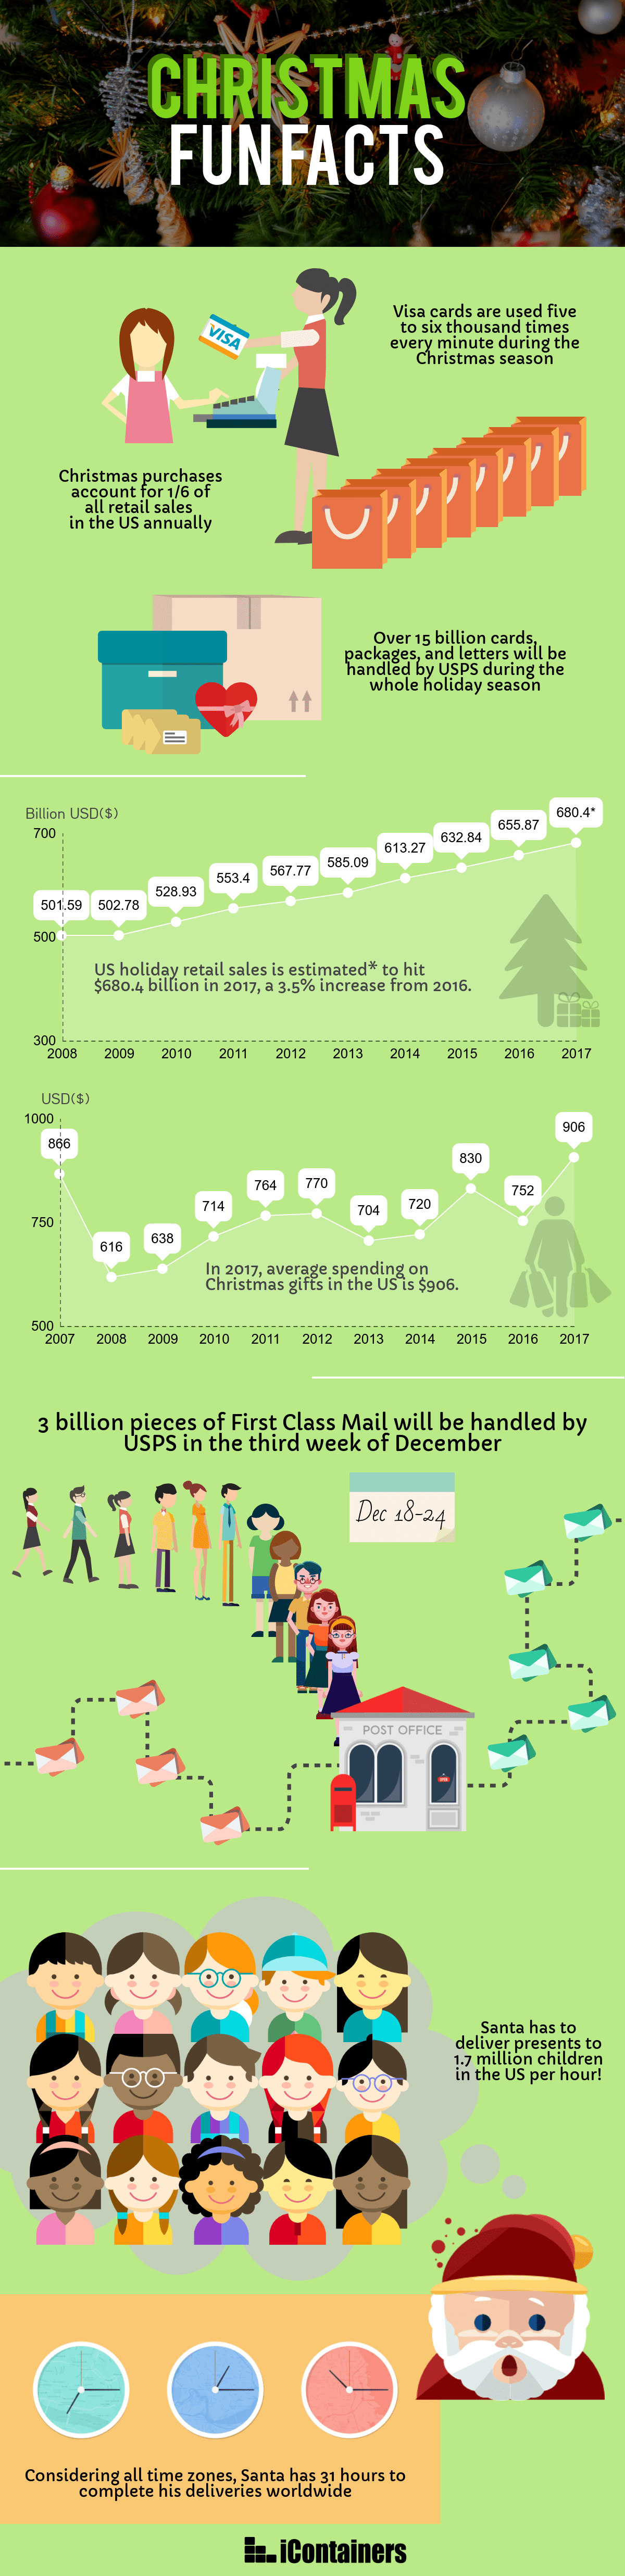 christmas-fun-facts.png